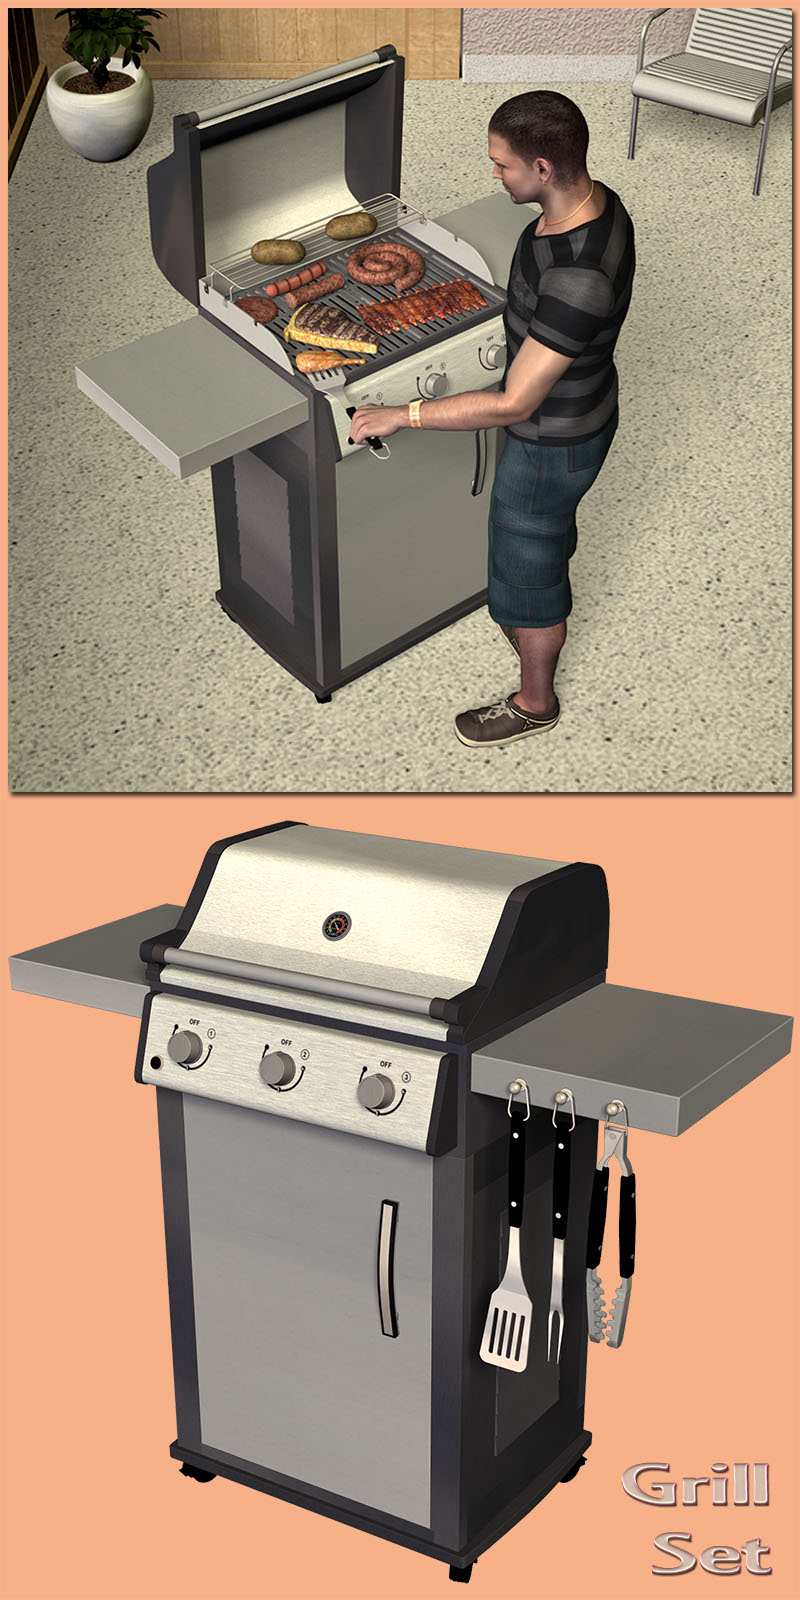 The Grill Set